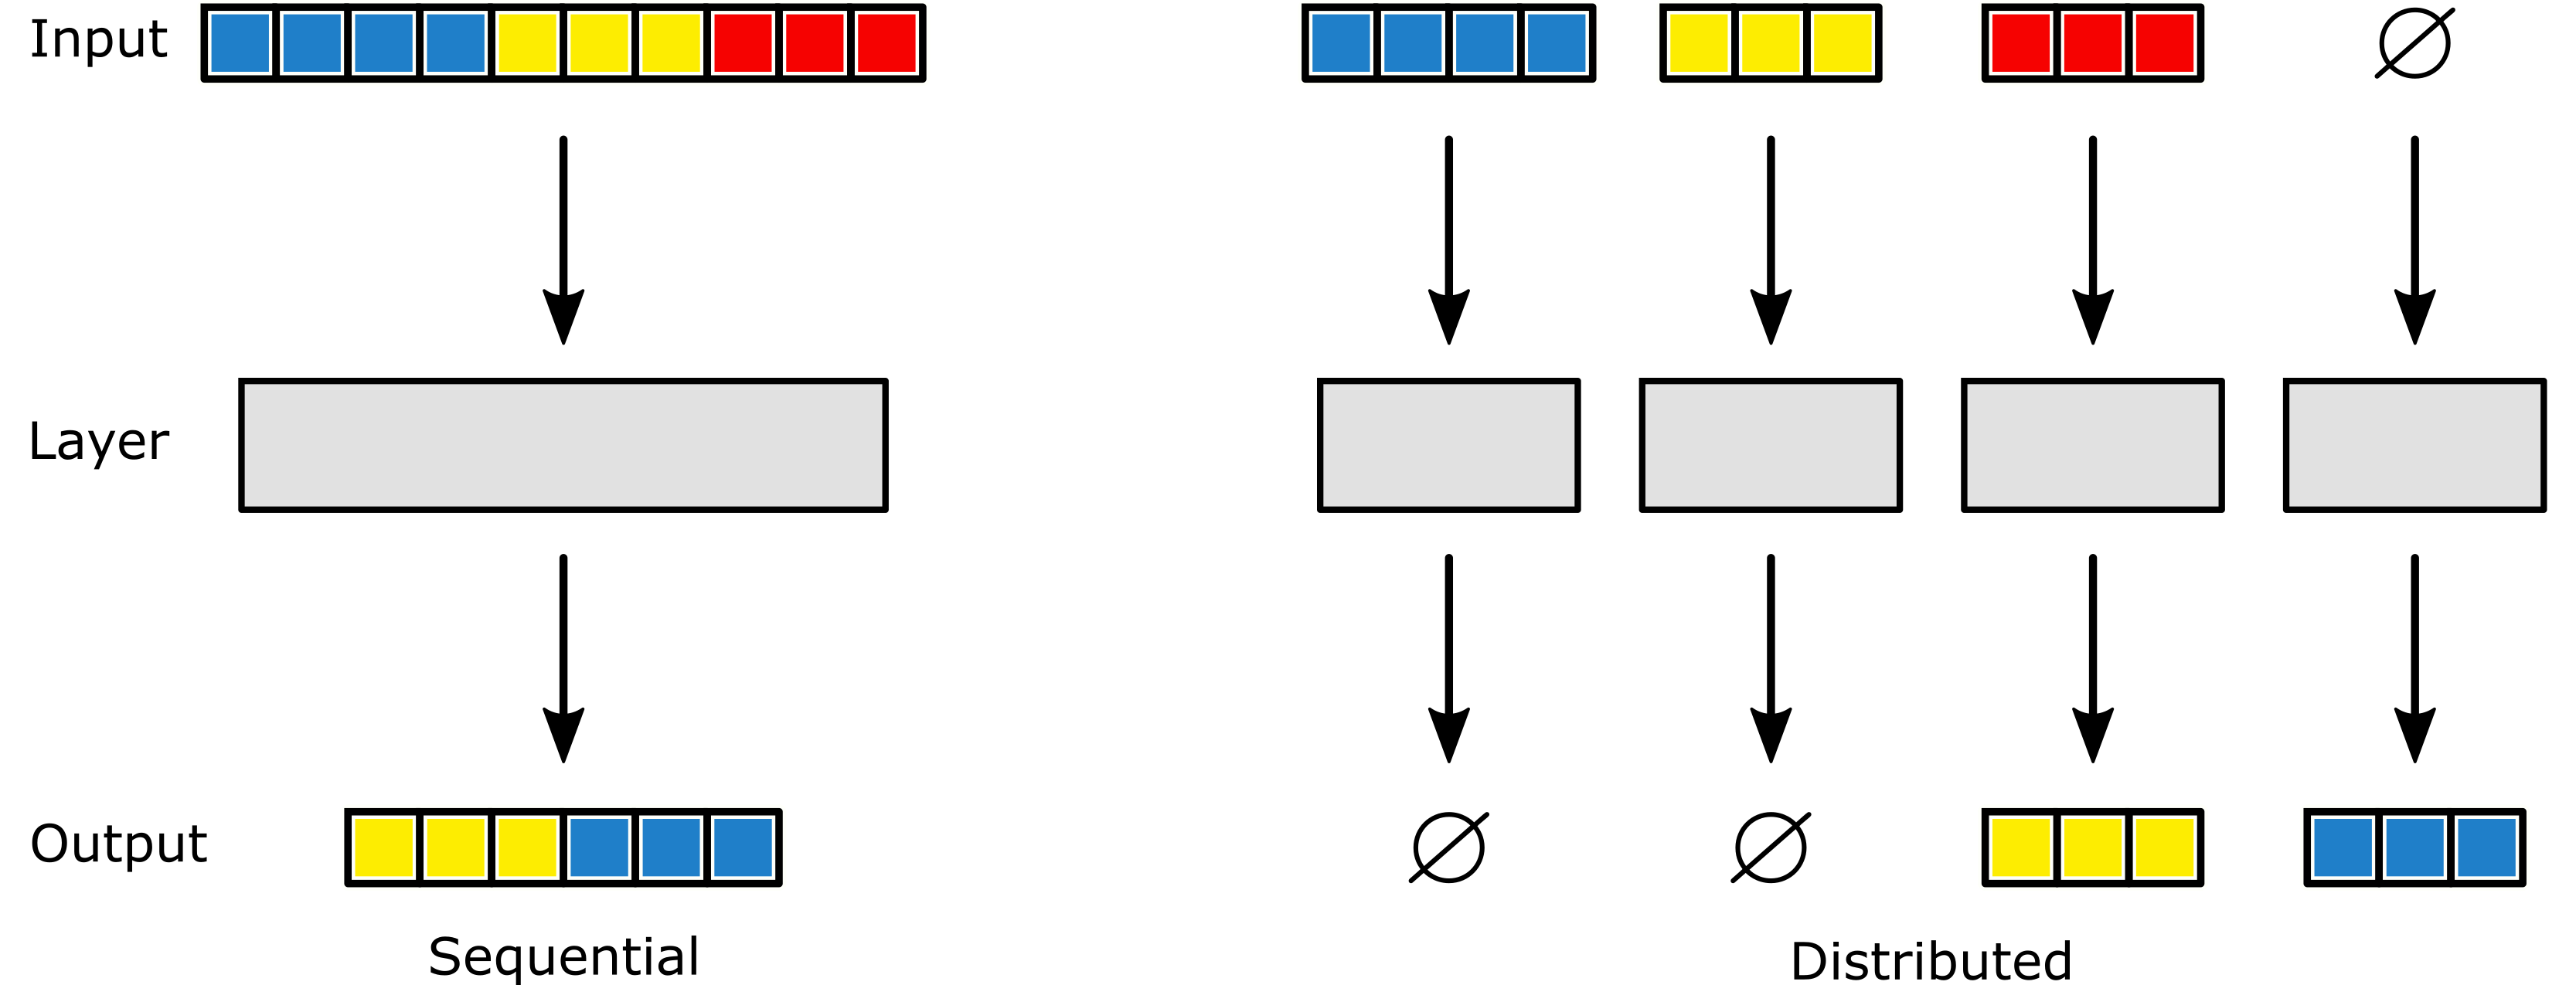 An example distributed layer with zero-volume inputs and outputs.